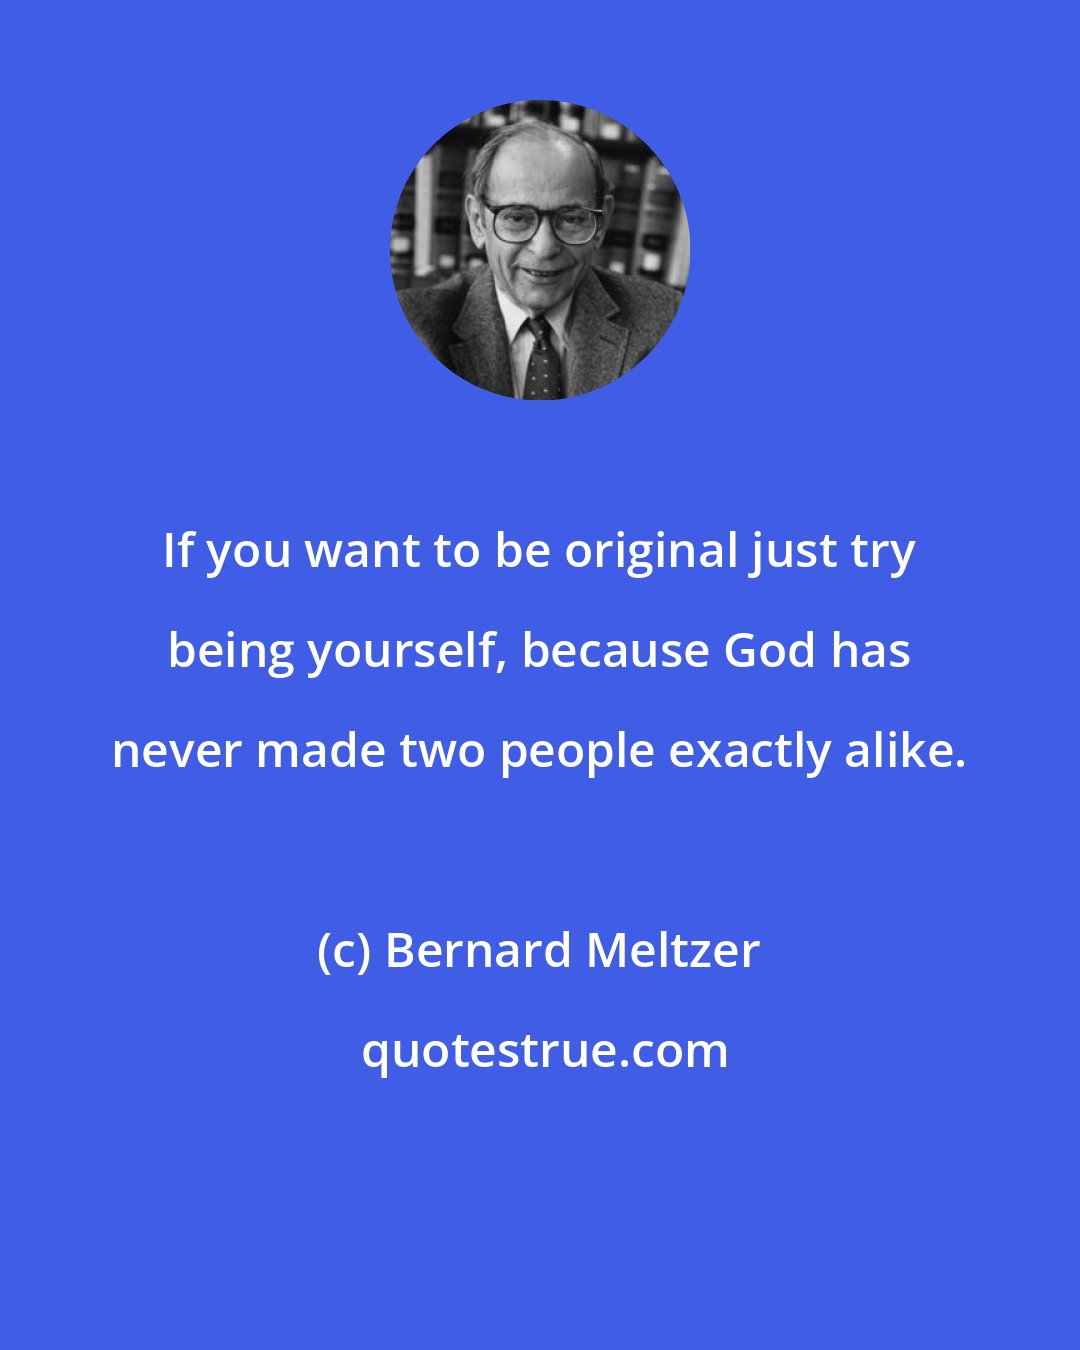 Bernard Meltzer: If you want to be original just try being yourself, because God has never made two people exactly alike.